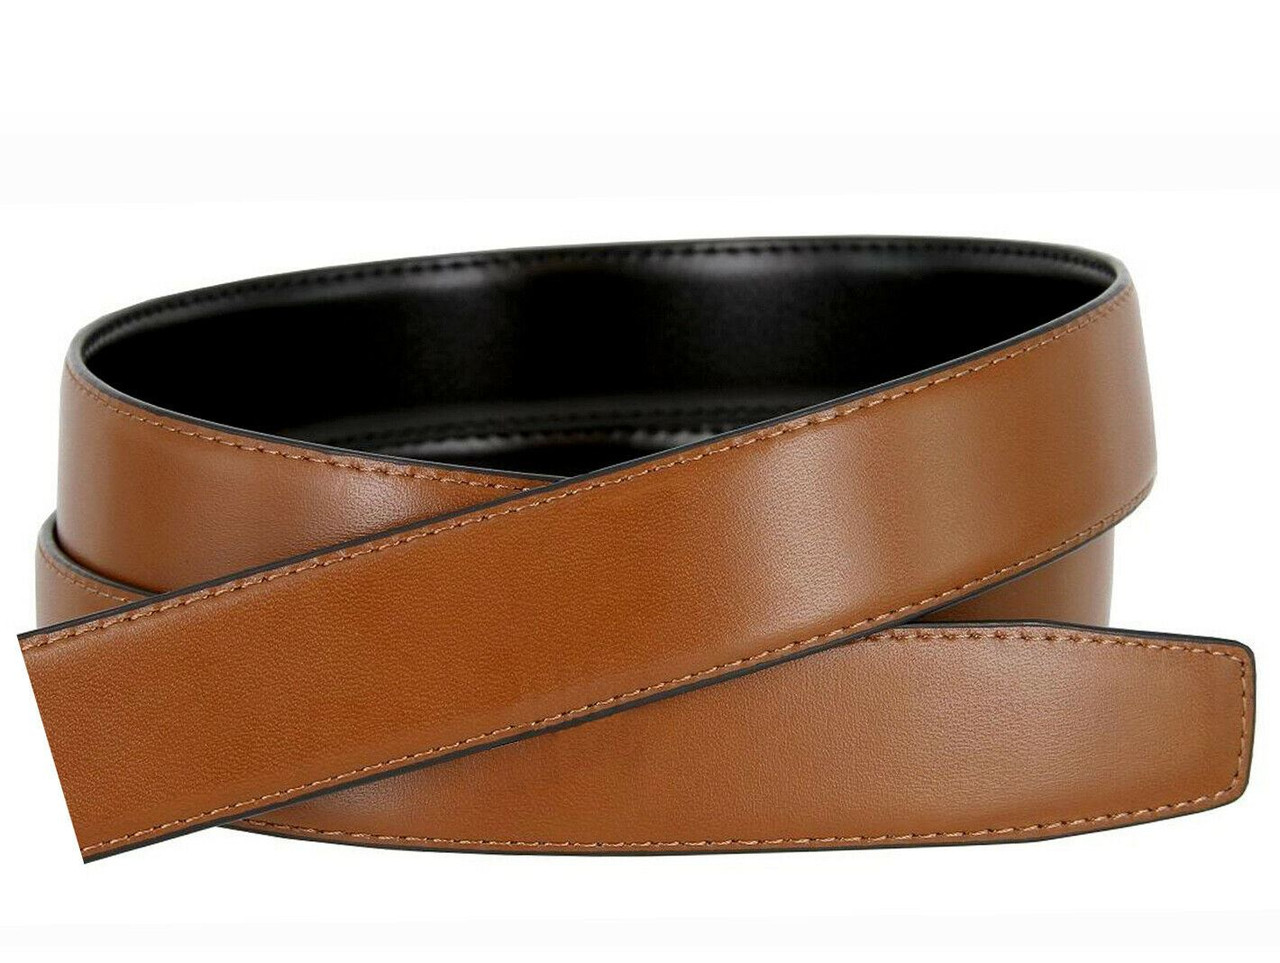 UzHot H Full Grain Leather Belt Strap Without Buckle Blank